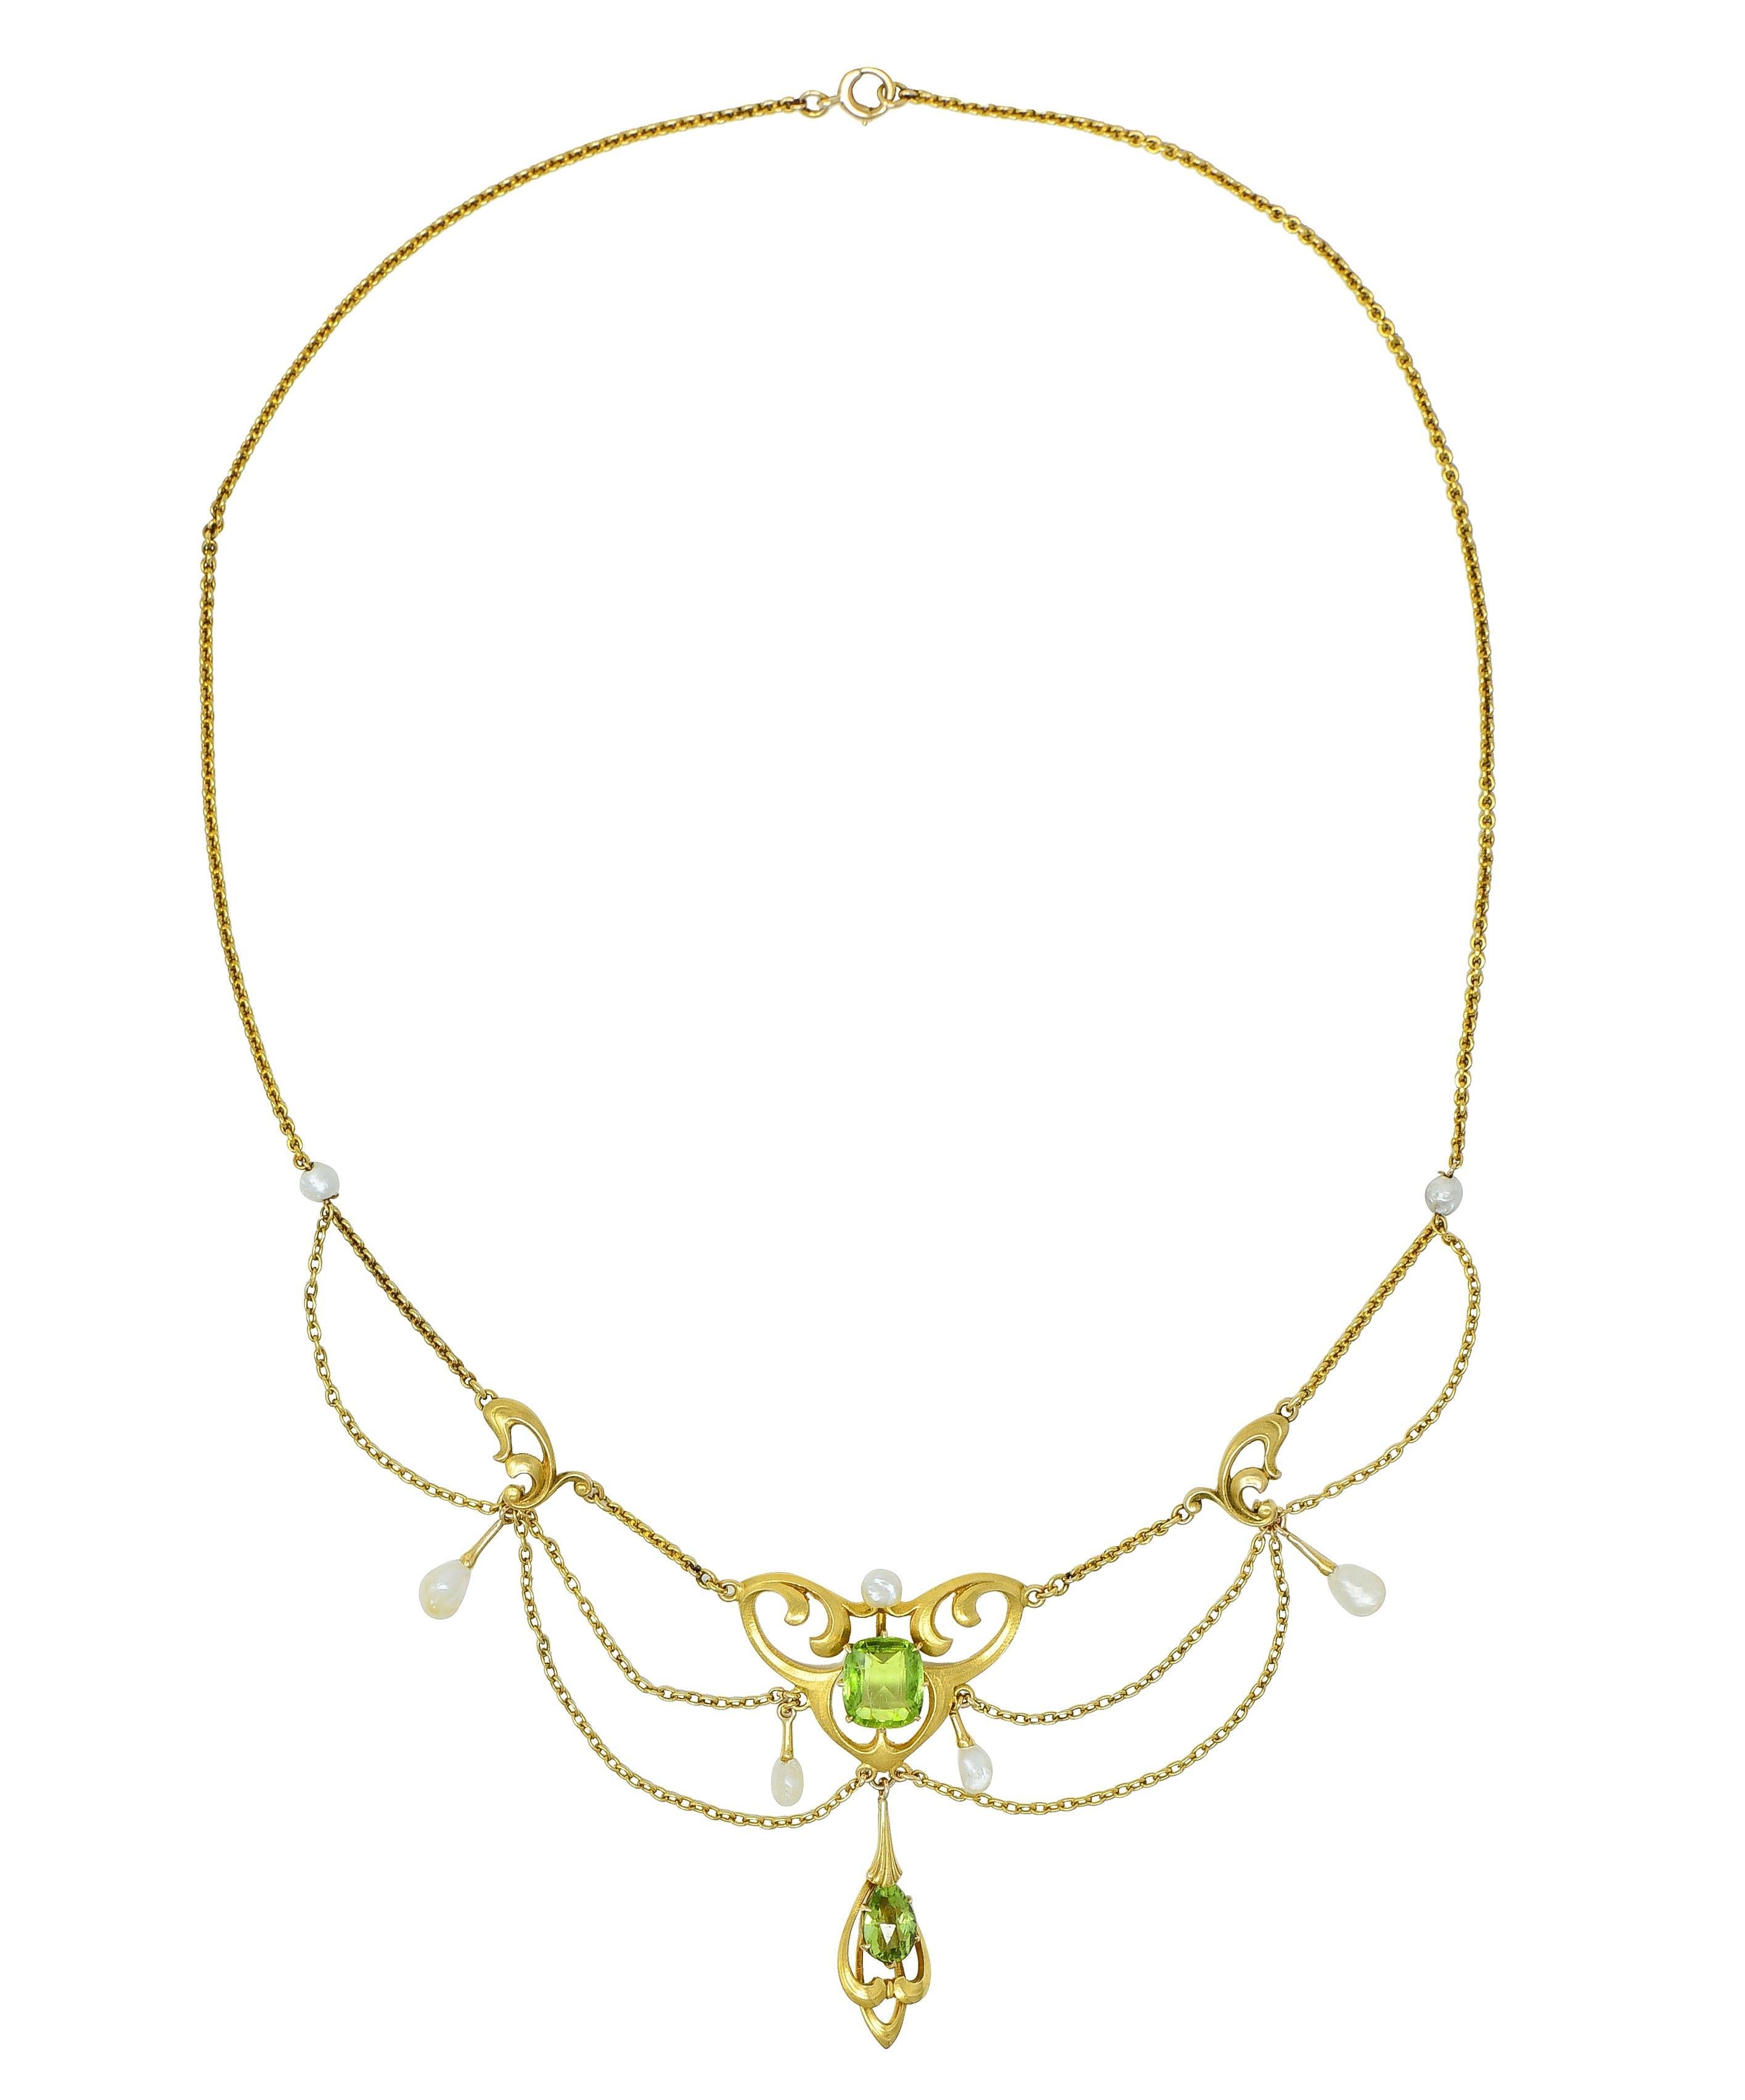 Designed as a cable link chain featuring a swagged station centering a cushion cut peridot
Weighing approximately 1.94 carats - transparent medium yellowish-green in color 
Prong set with a flowing whiplash motif surround and suspending whiplash